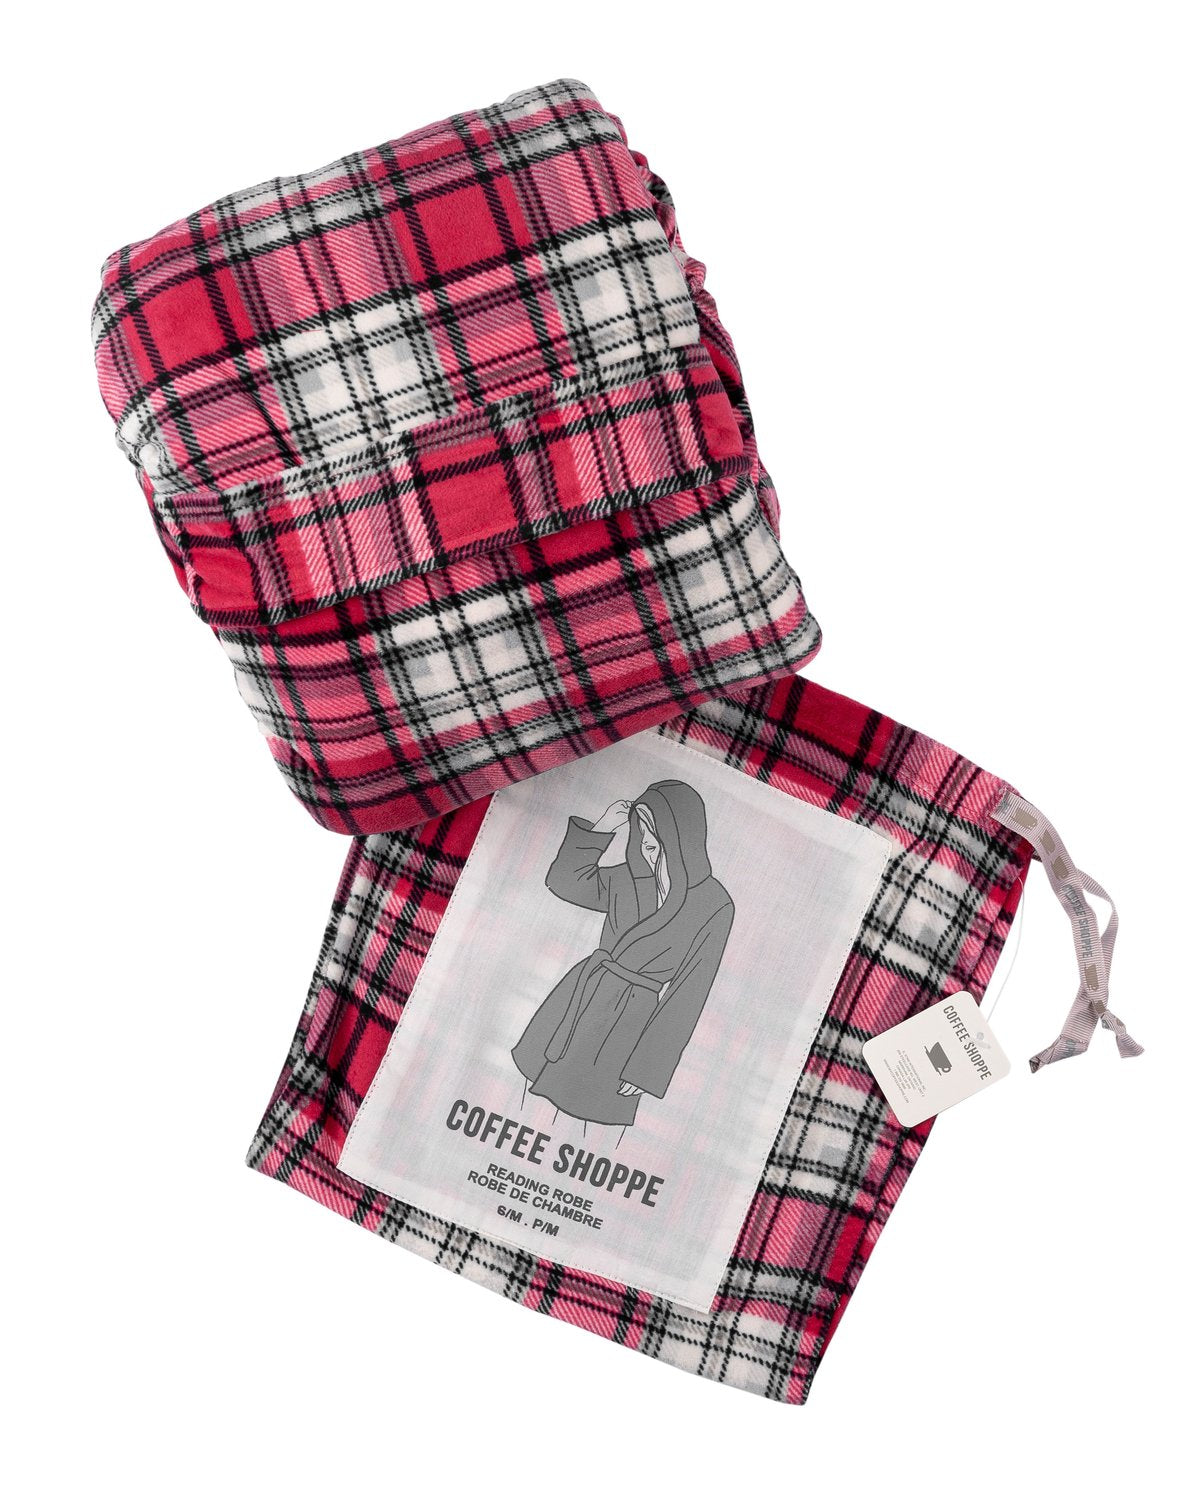 Coffee Shoppe Stay-at-Home Hooded Lounge Robe - Deep Red Tartan